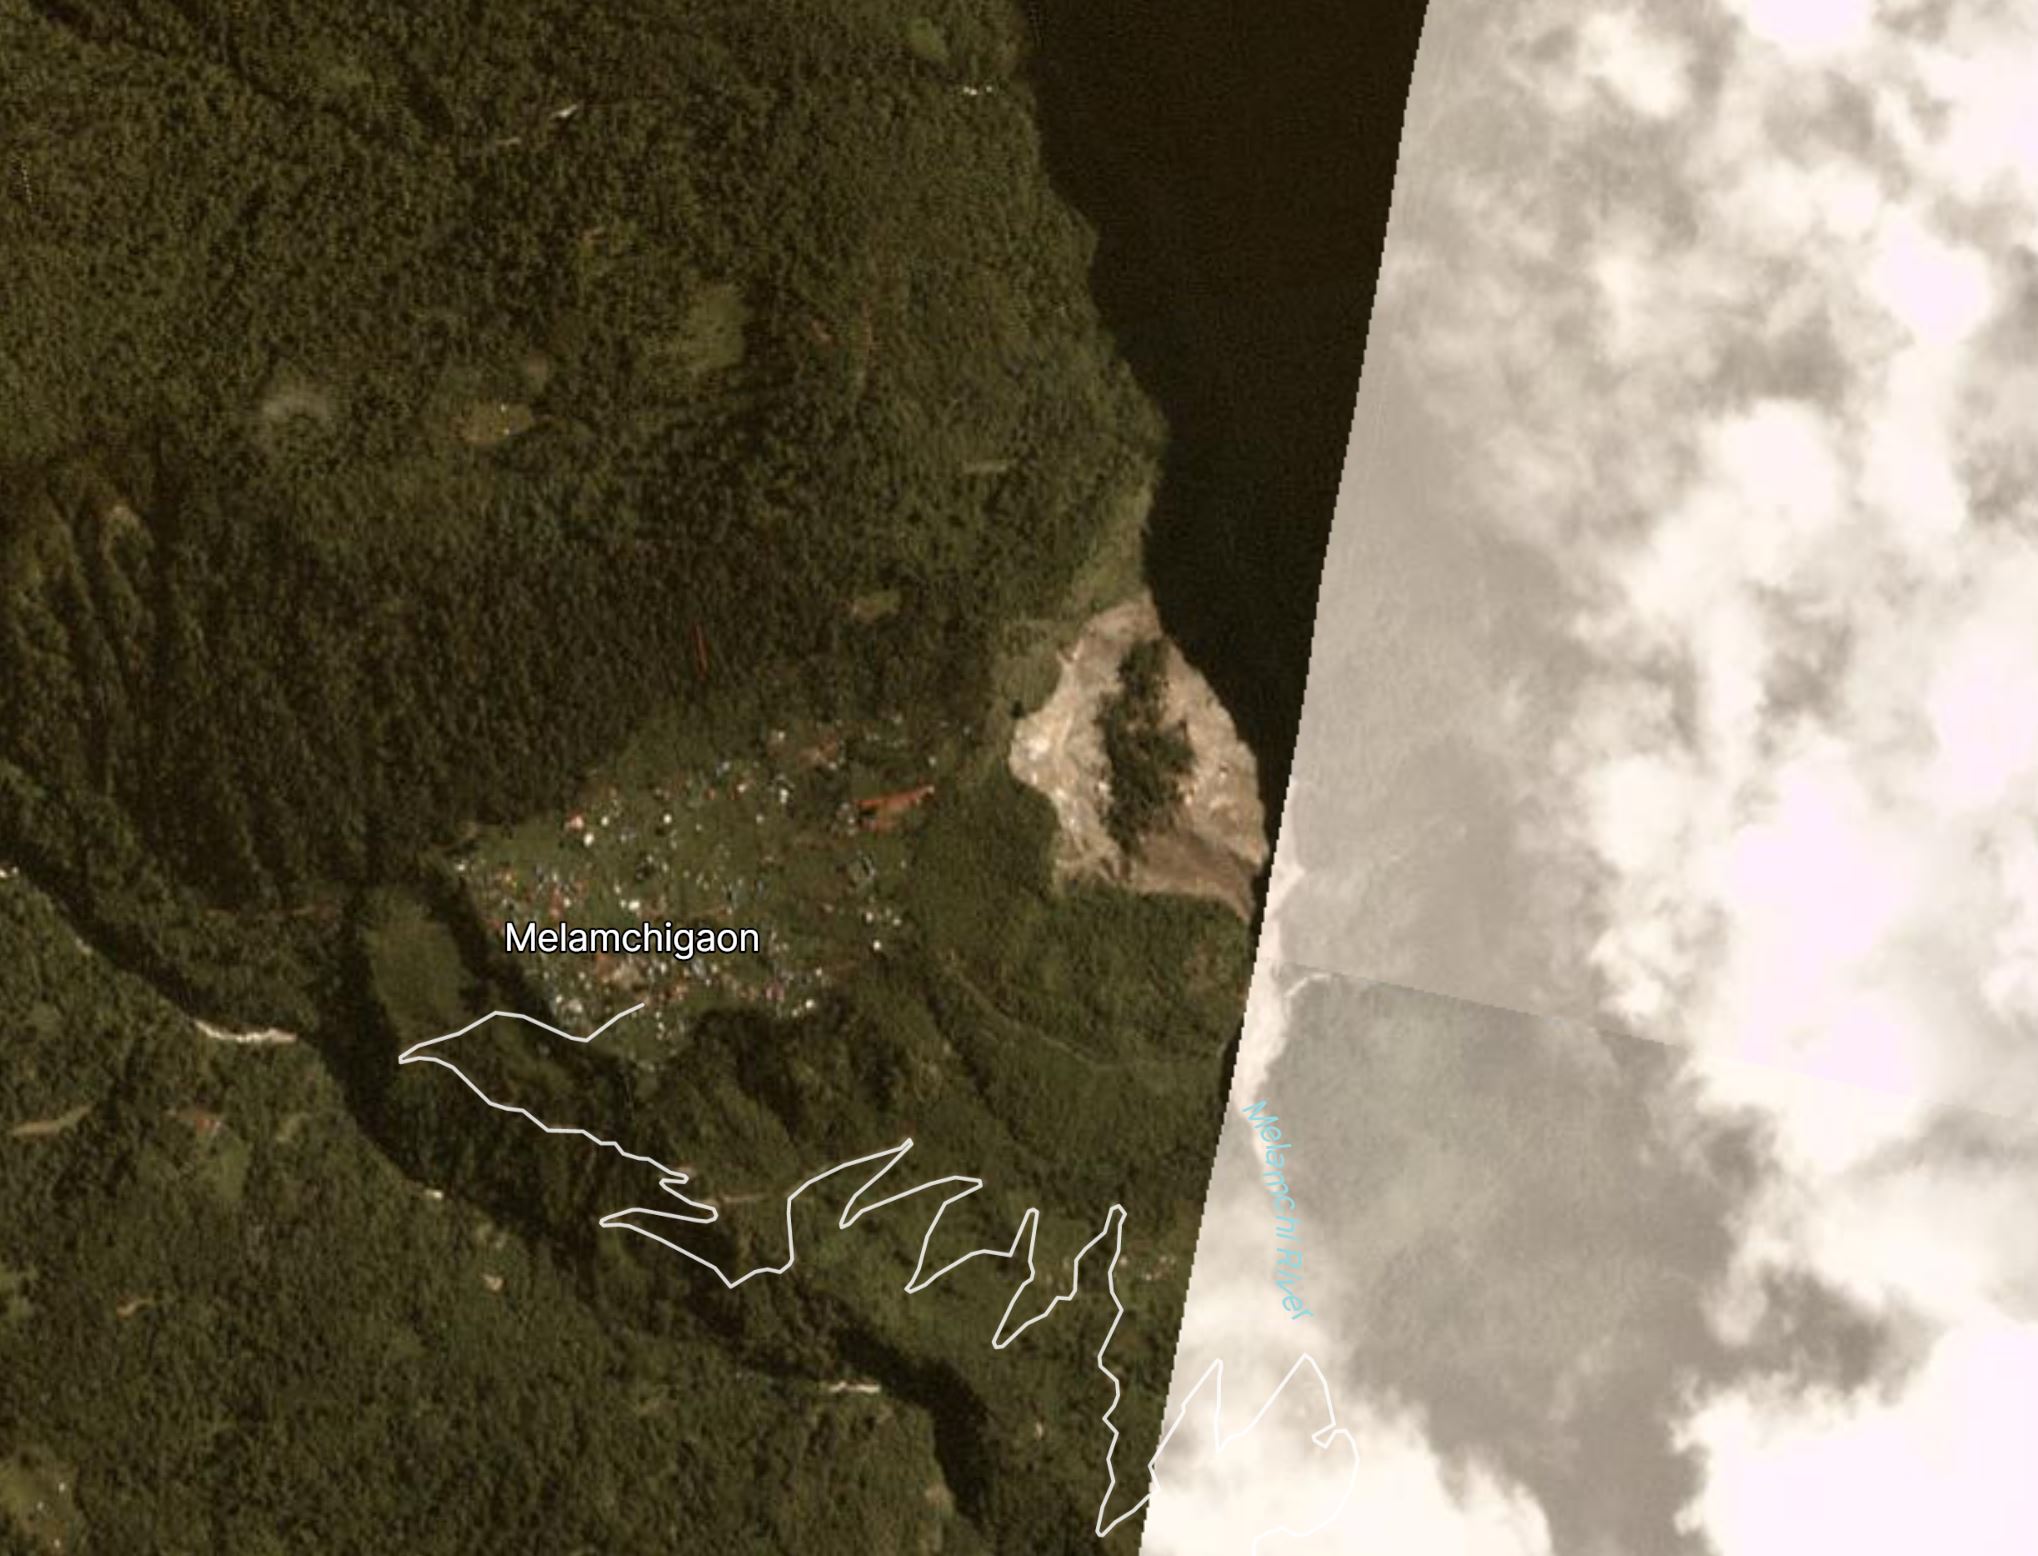 Planet Labs image of the likely cause of the 14 June 2021 Melamchi flood.  Image copyright Planet Labs, used with permission.